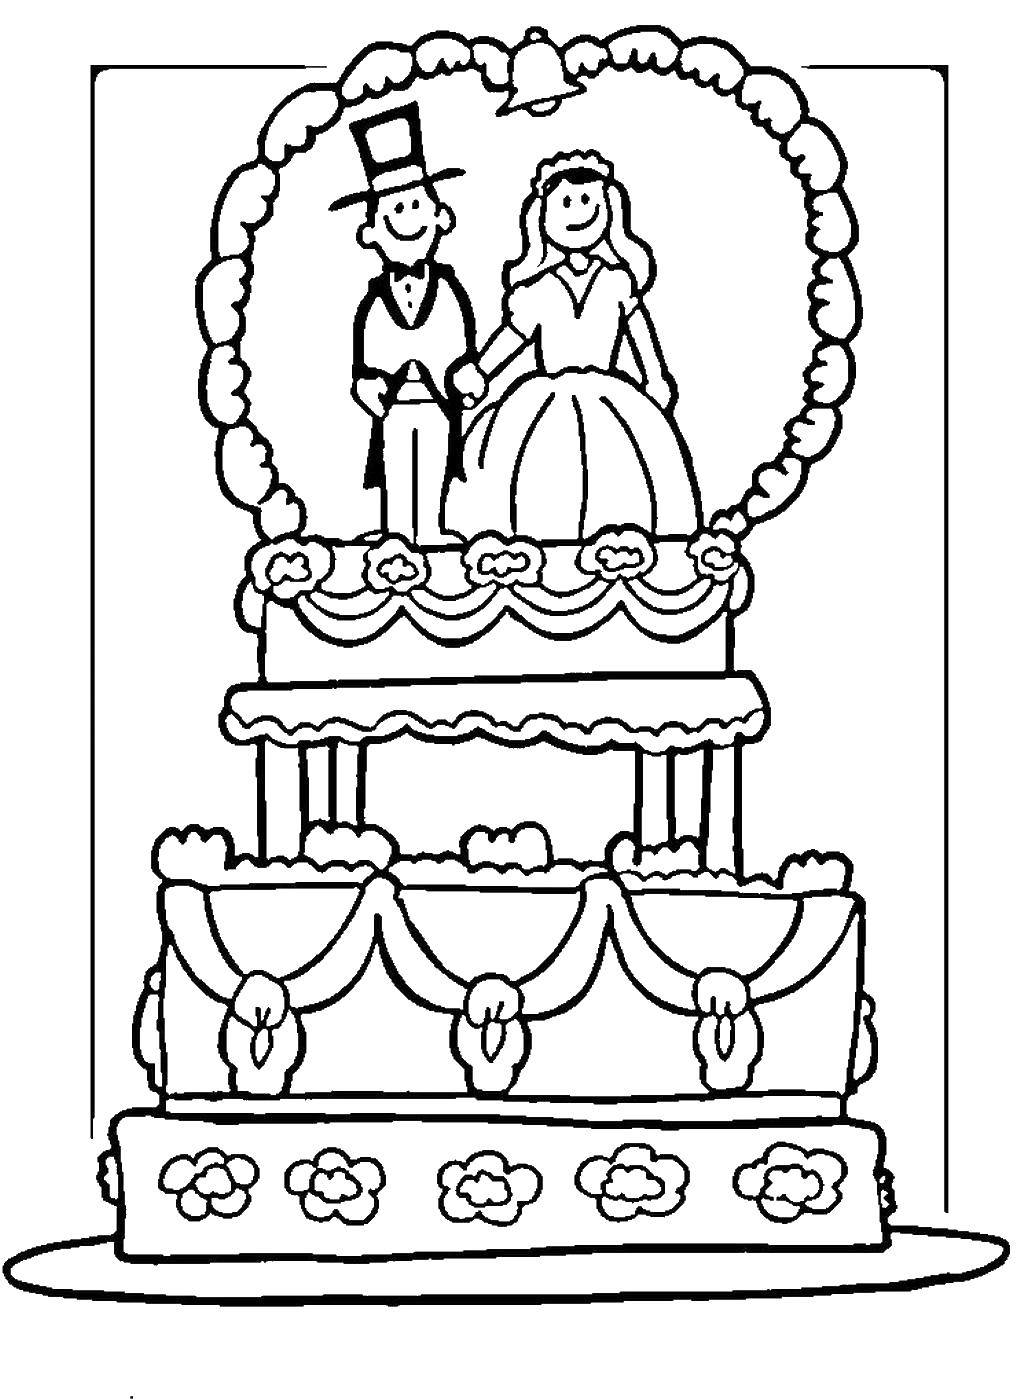 Coloring Delicious wedding cake. Category cakes. Tags:  Cake, food, holiday.